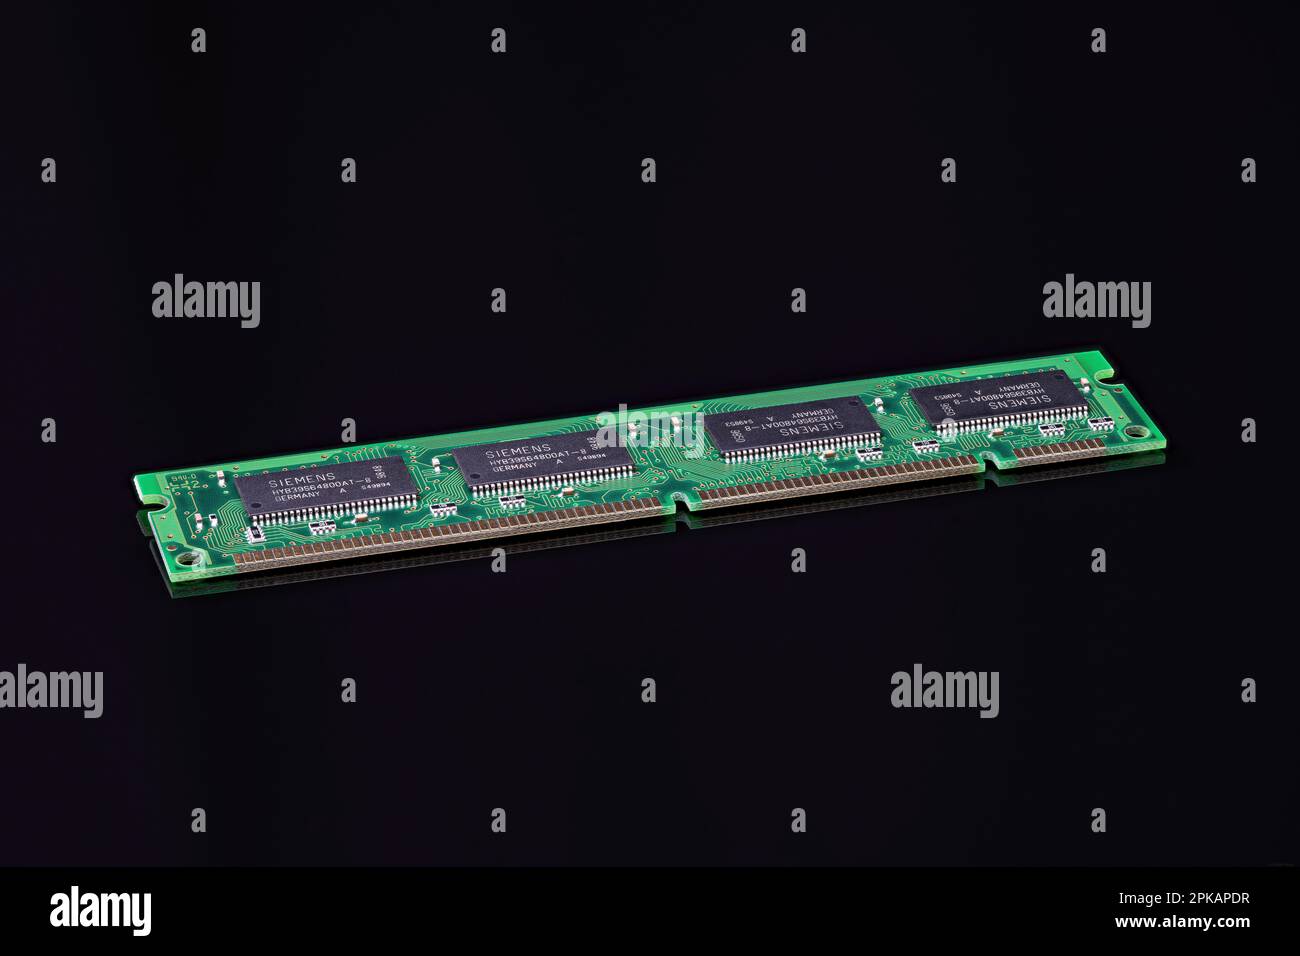 Computer, computer part, processor, fan, focus stacking, macro, large depth of field, PC, component, electronics, computer electronics, CPU, semiconductor, computer technology, central processing unit, main processor, central processing unit, microelectronics, Stock Photo